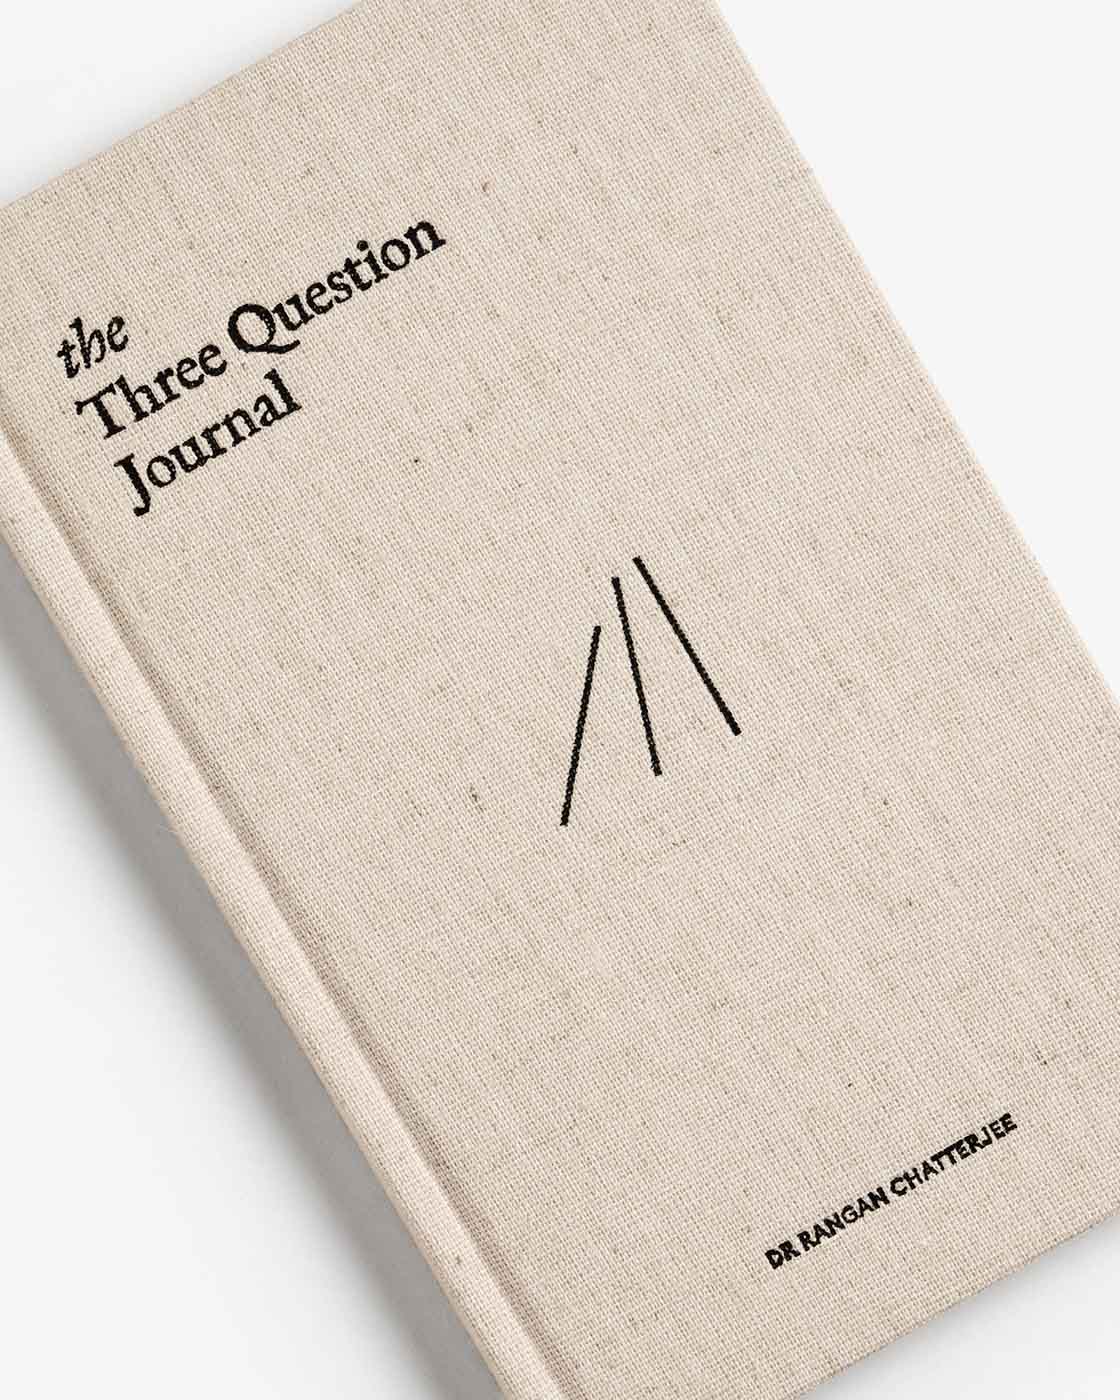 The Three Question Journal